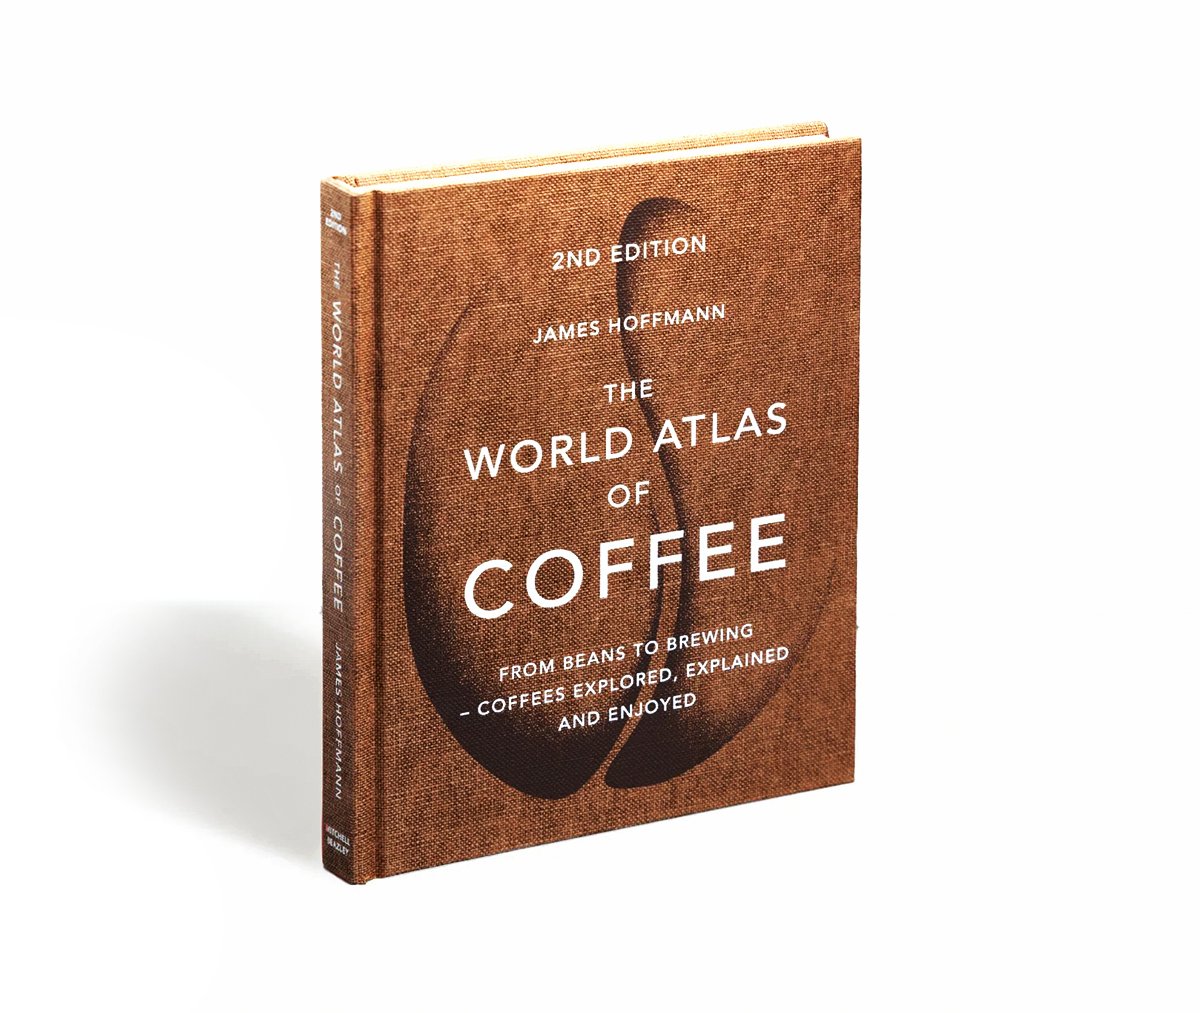 THE WORLD ATLAS OF COFFEE 2nd EDITION